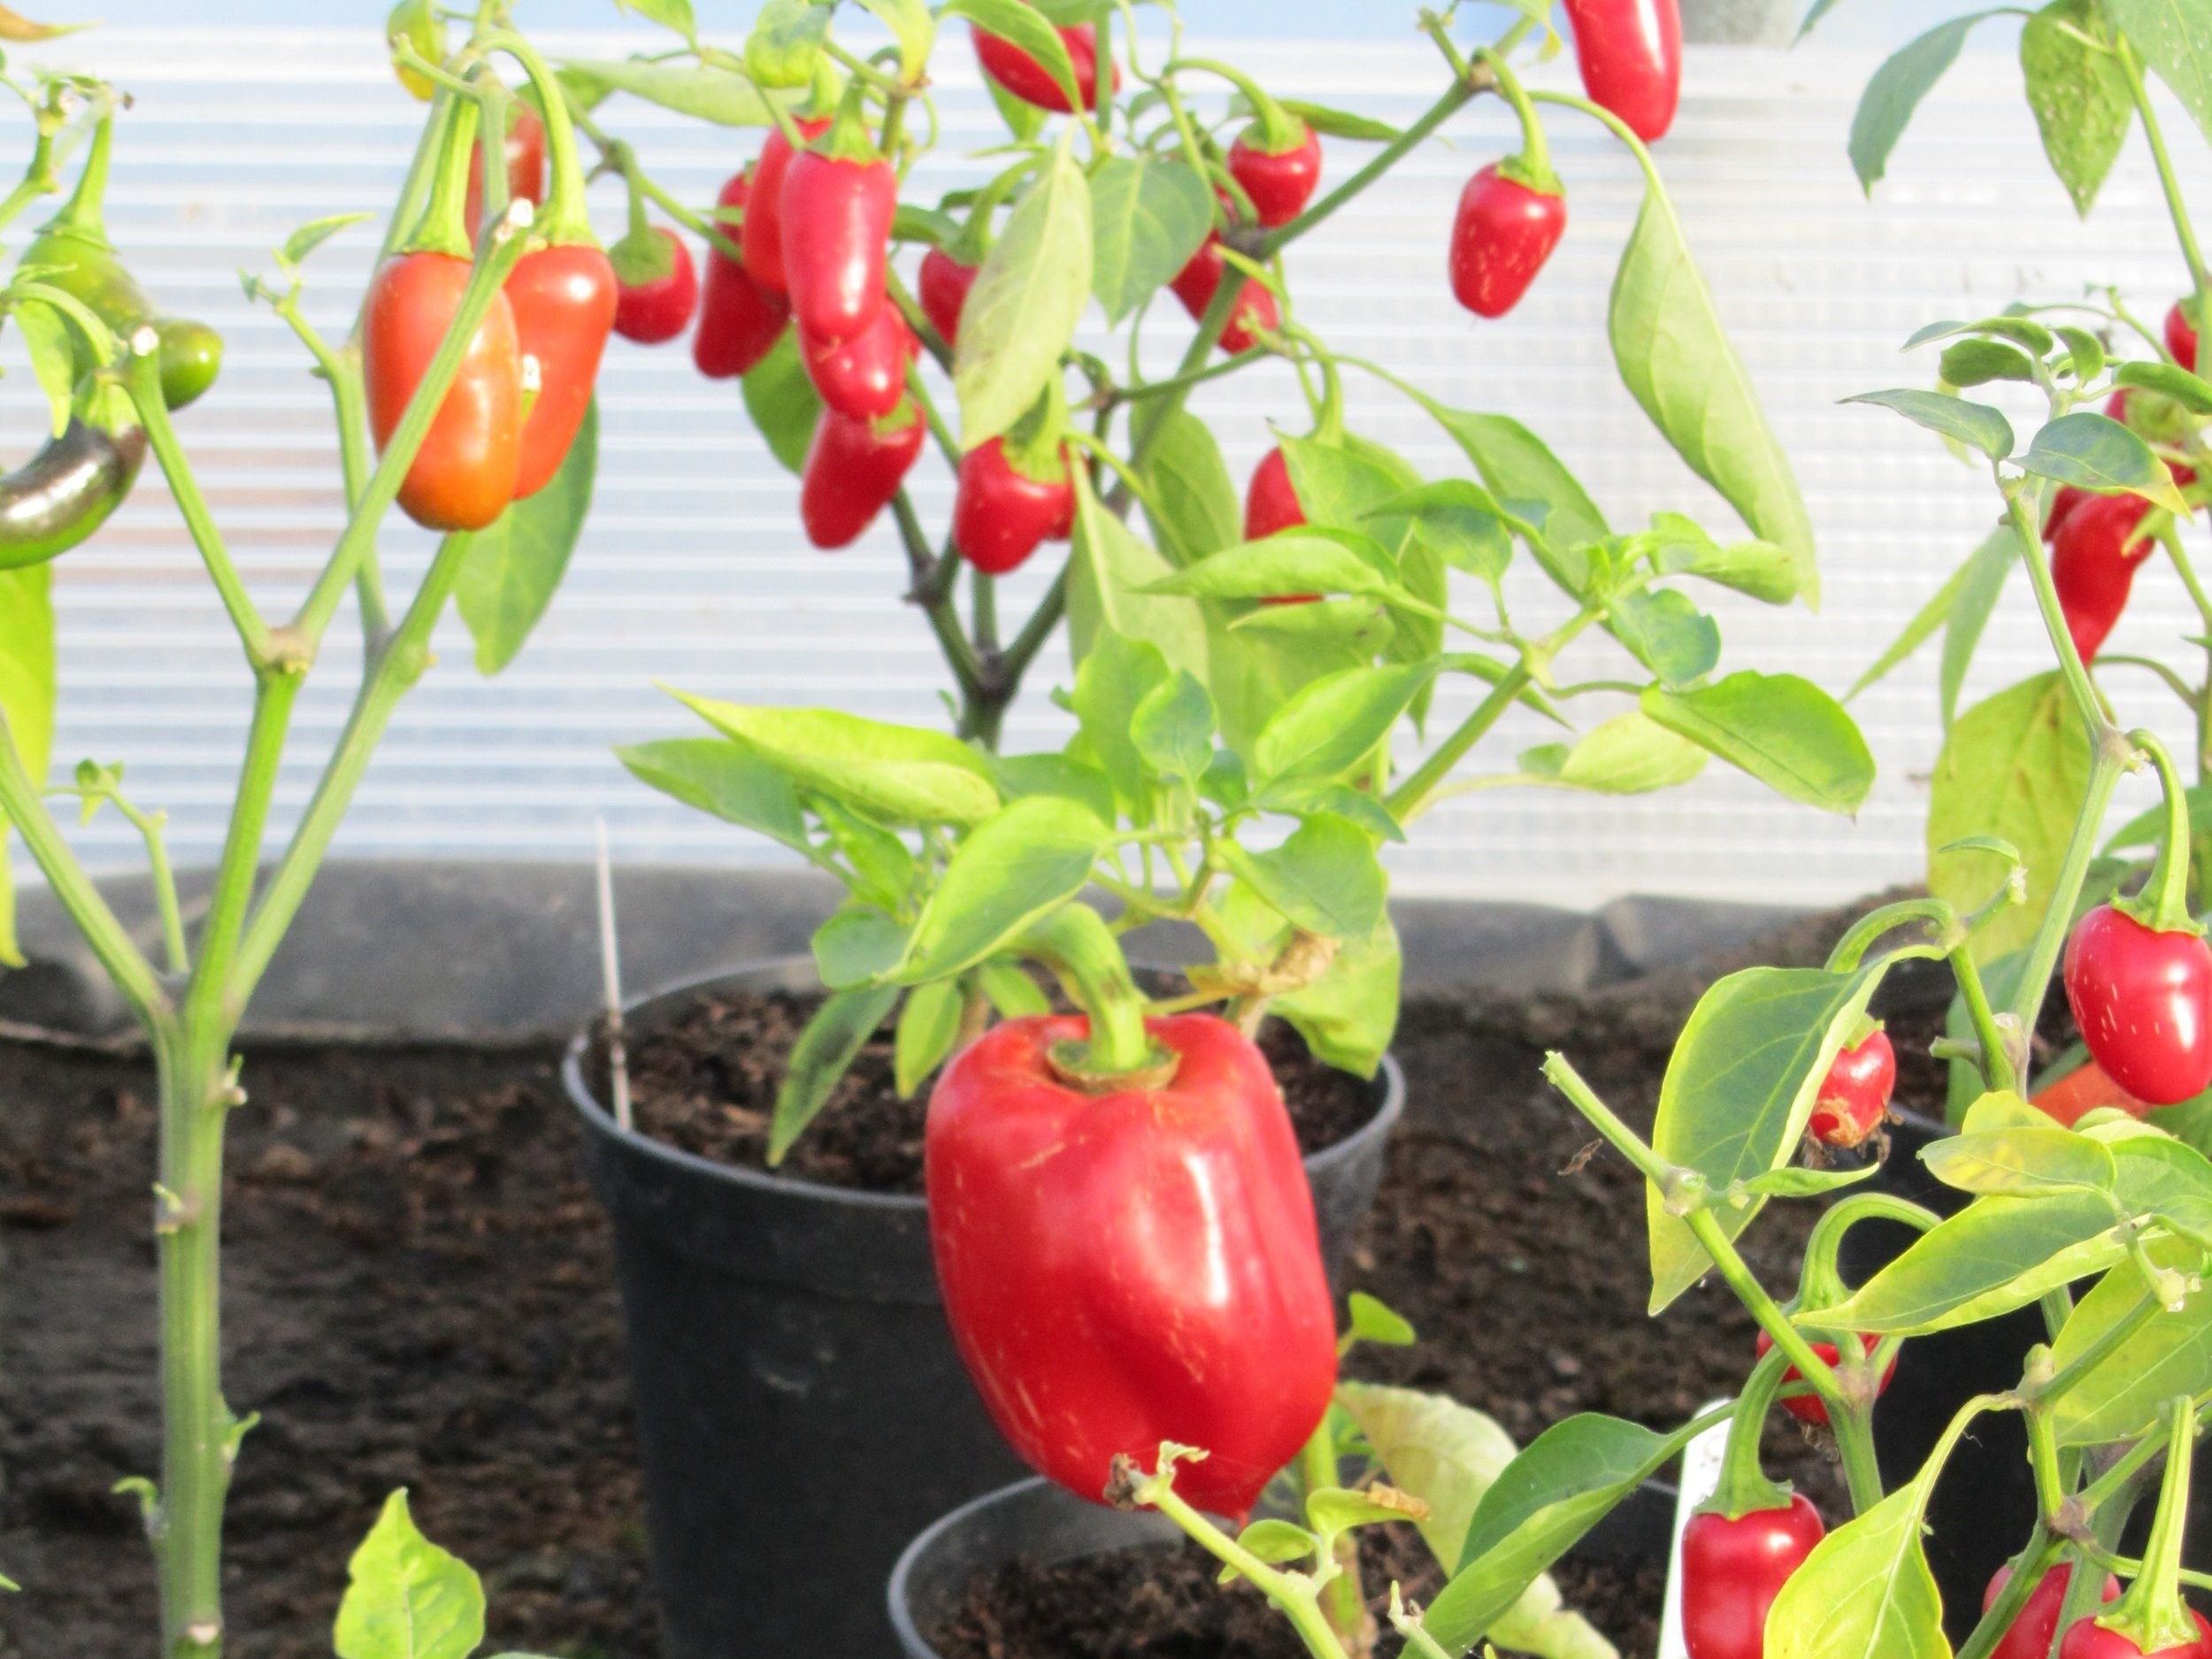 polytunnel+peppers+in+pot+for+talk.jpg